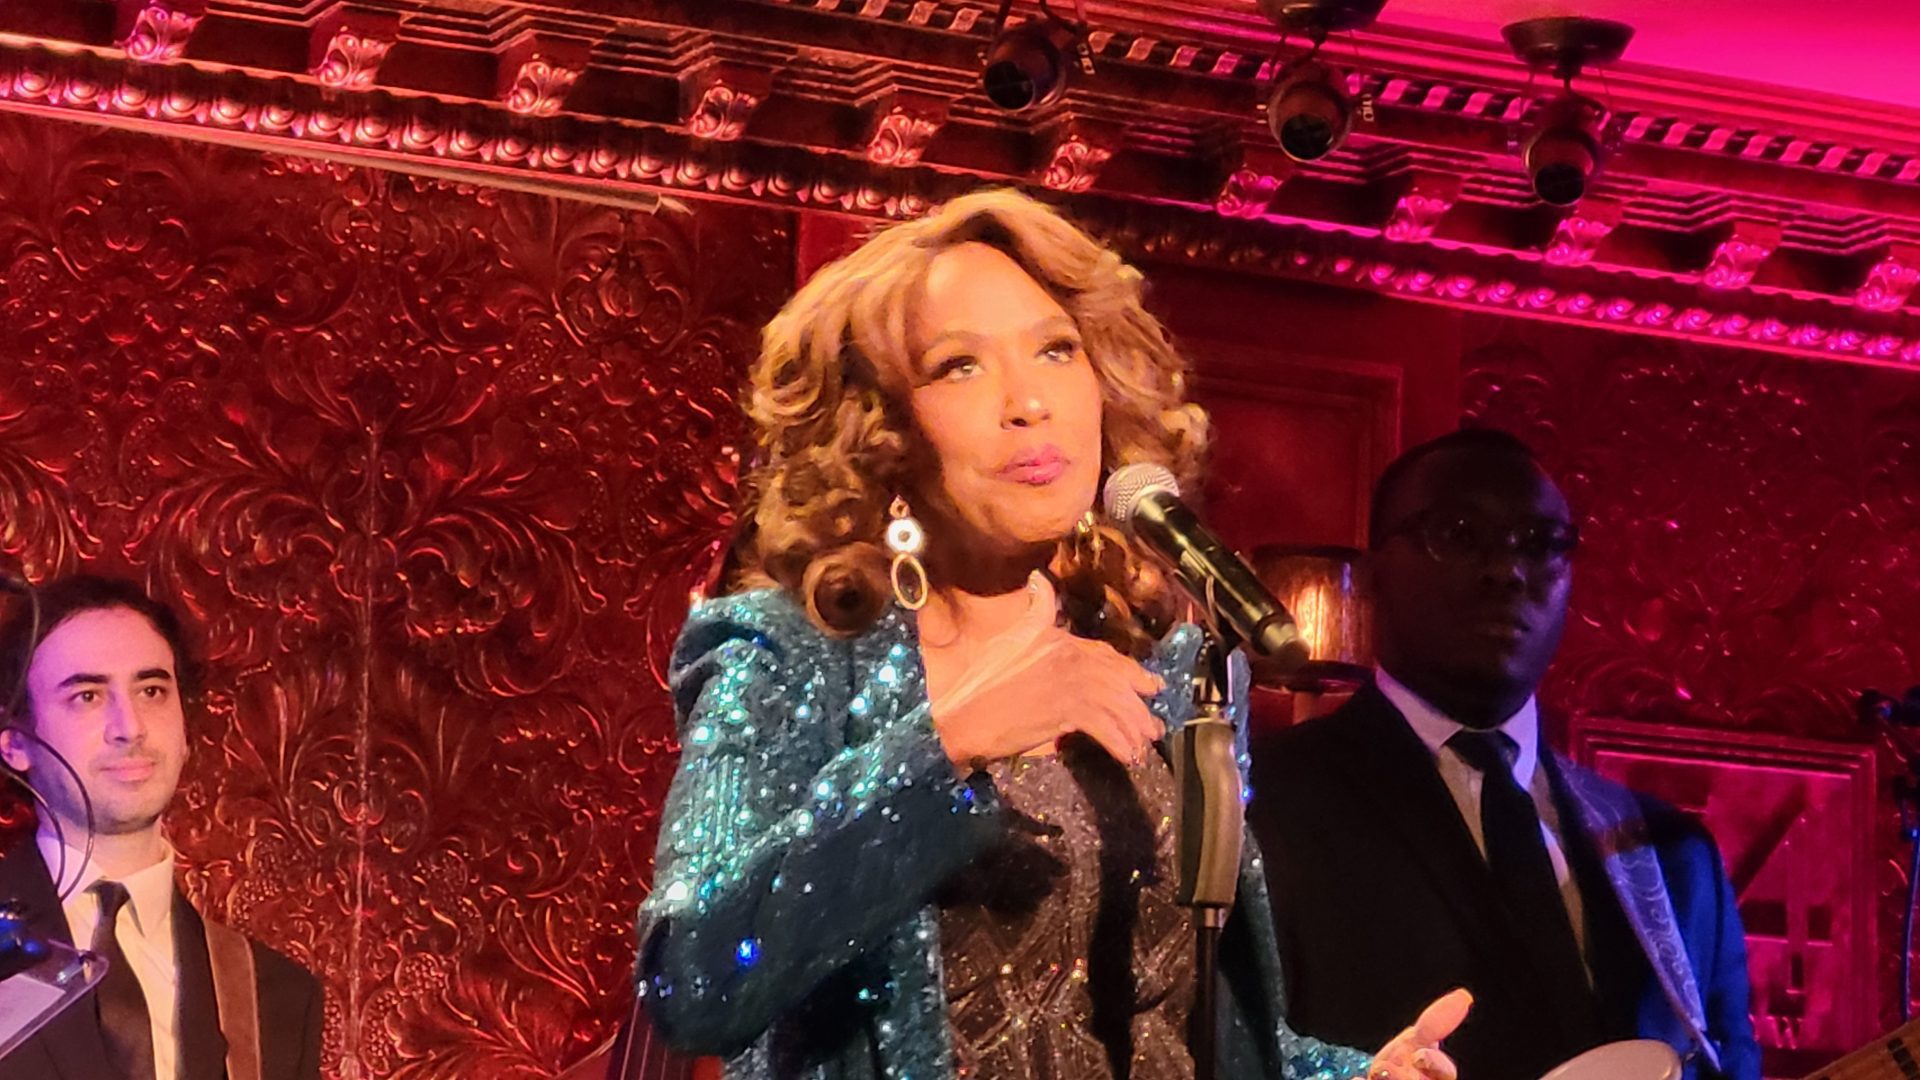 Jennifer Holliday performs in New York City. (Photo by Derrel Jazz Johnson for rolling out.)